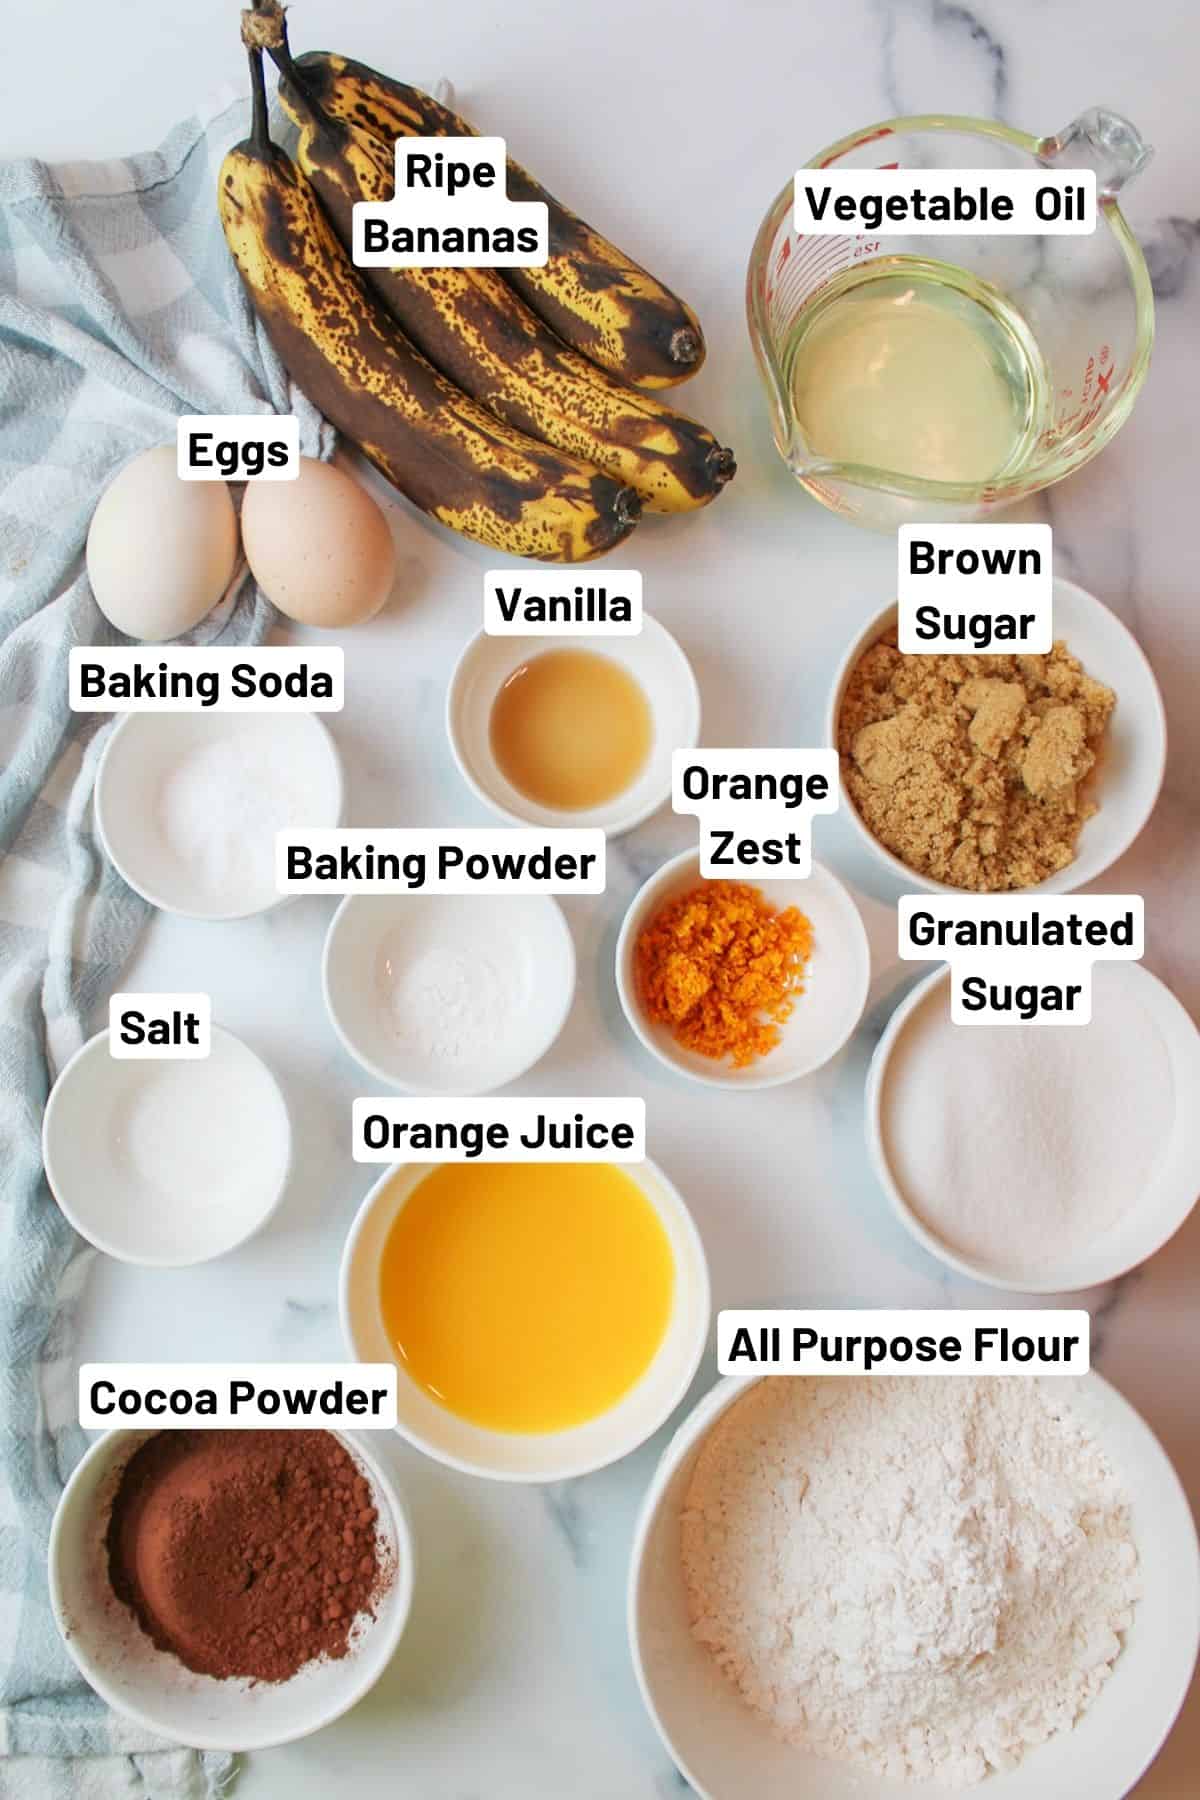 labeled ingredients needed to make chocolate orange banana bread.